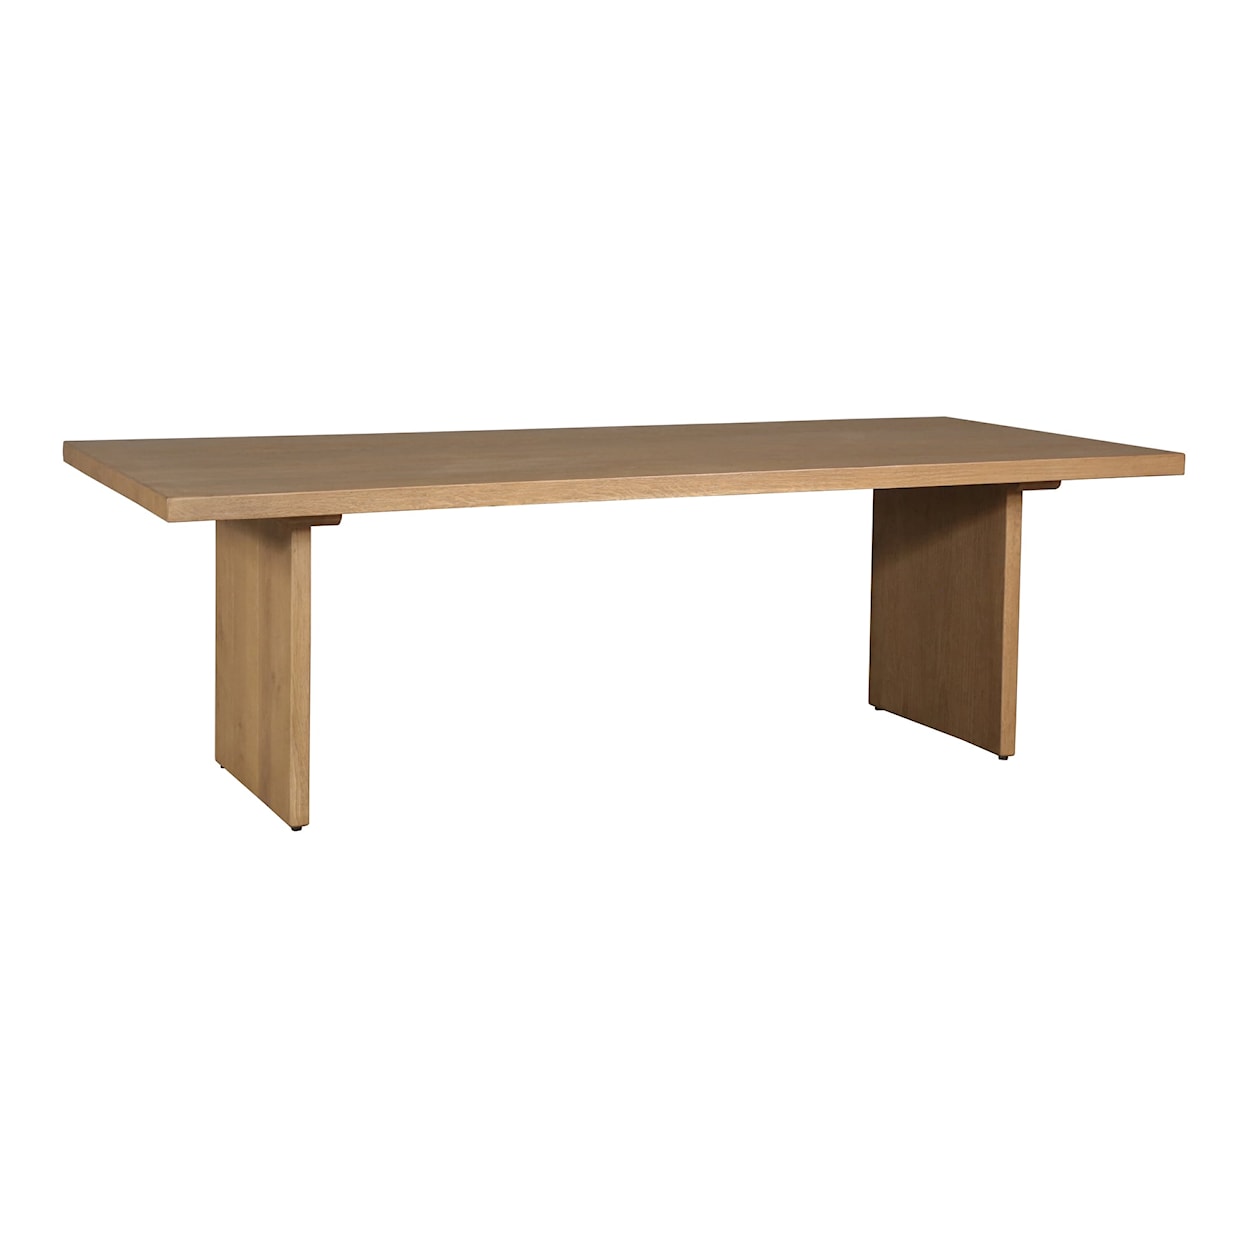 Moe's Home Collection Koshi Solid Oak Rectangular Dining Table